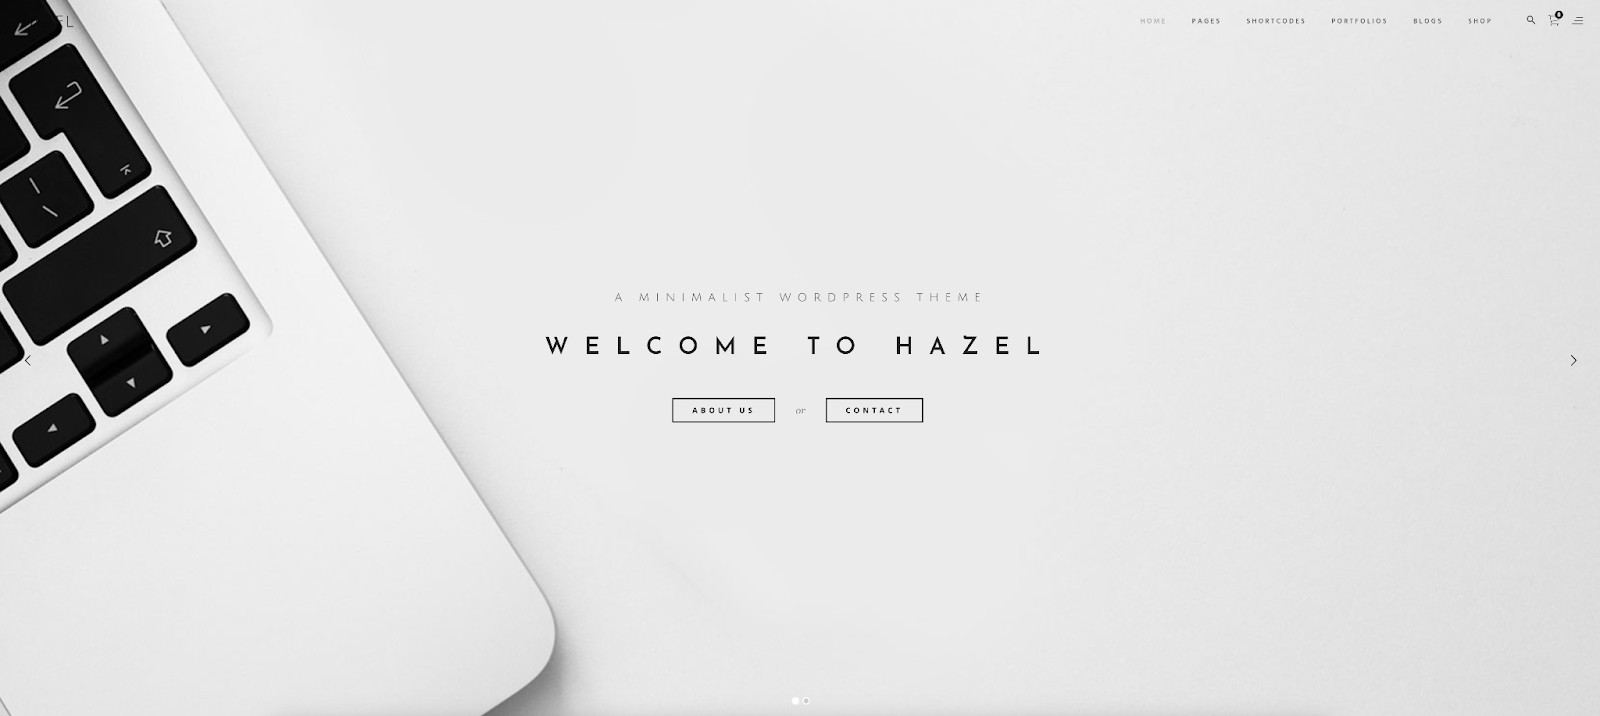 Use Hazel for your next blog and shop and get your website on WordPress quickly